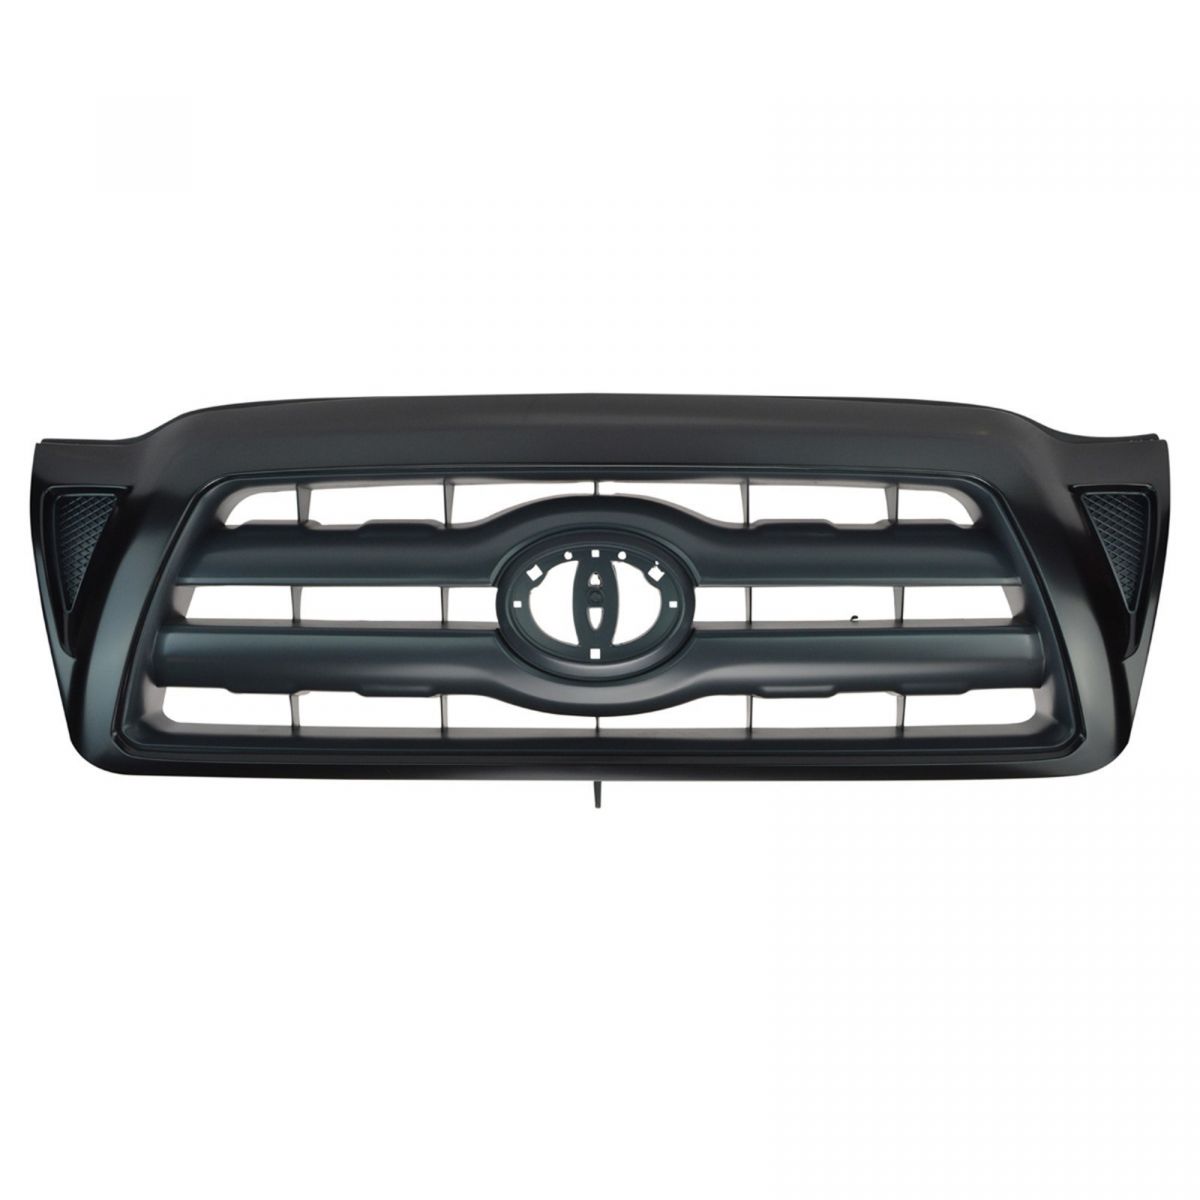 2008 Toyota Tacoma Replacement Grill